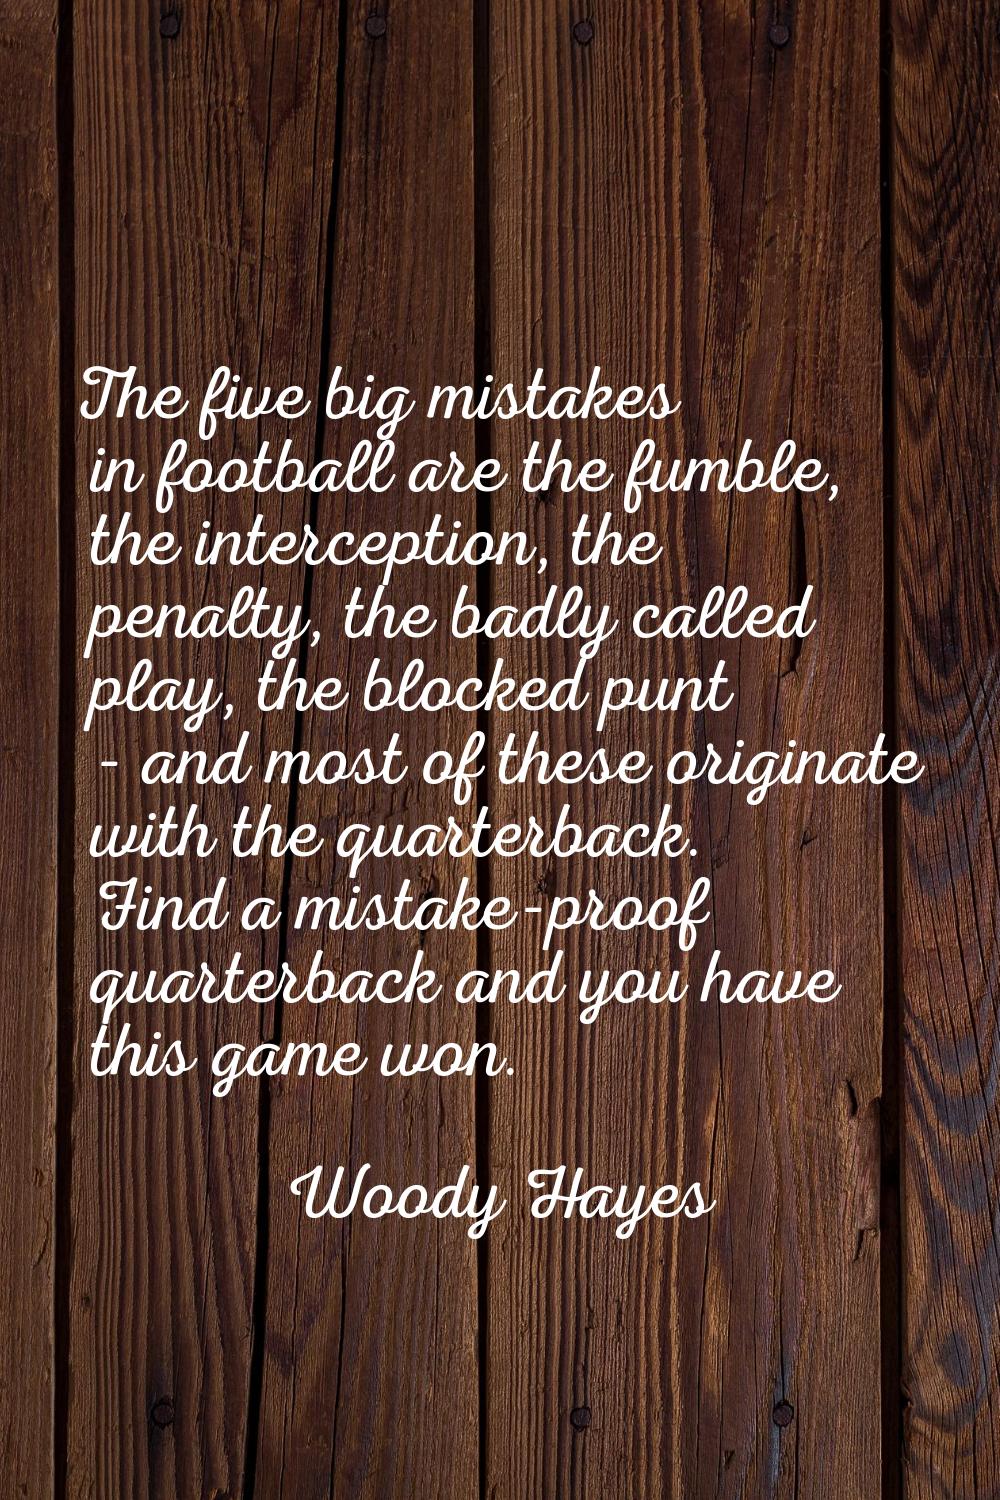 The five big mistakes in football are the fumble, the interception, the penalty, the badly called p